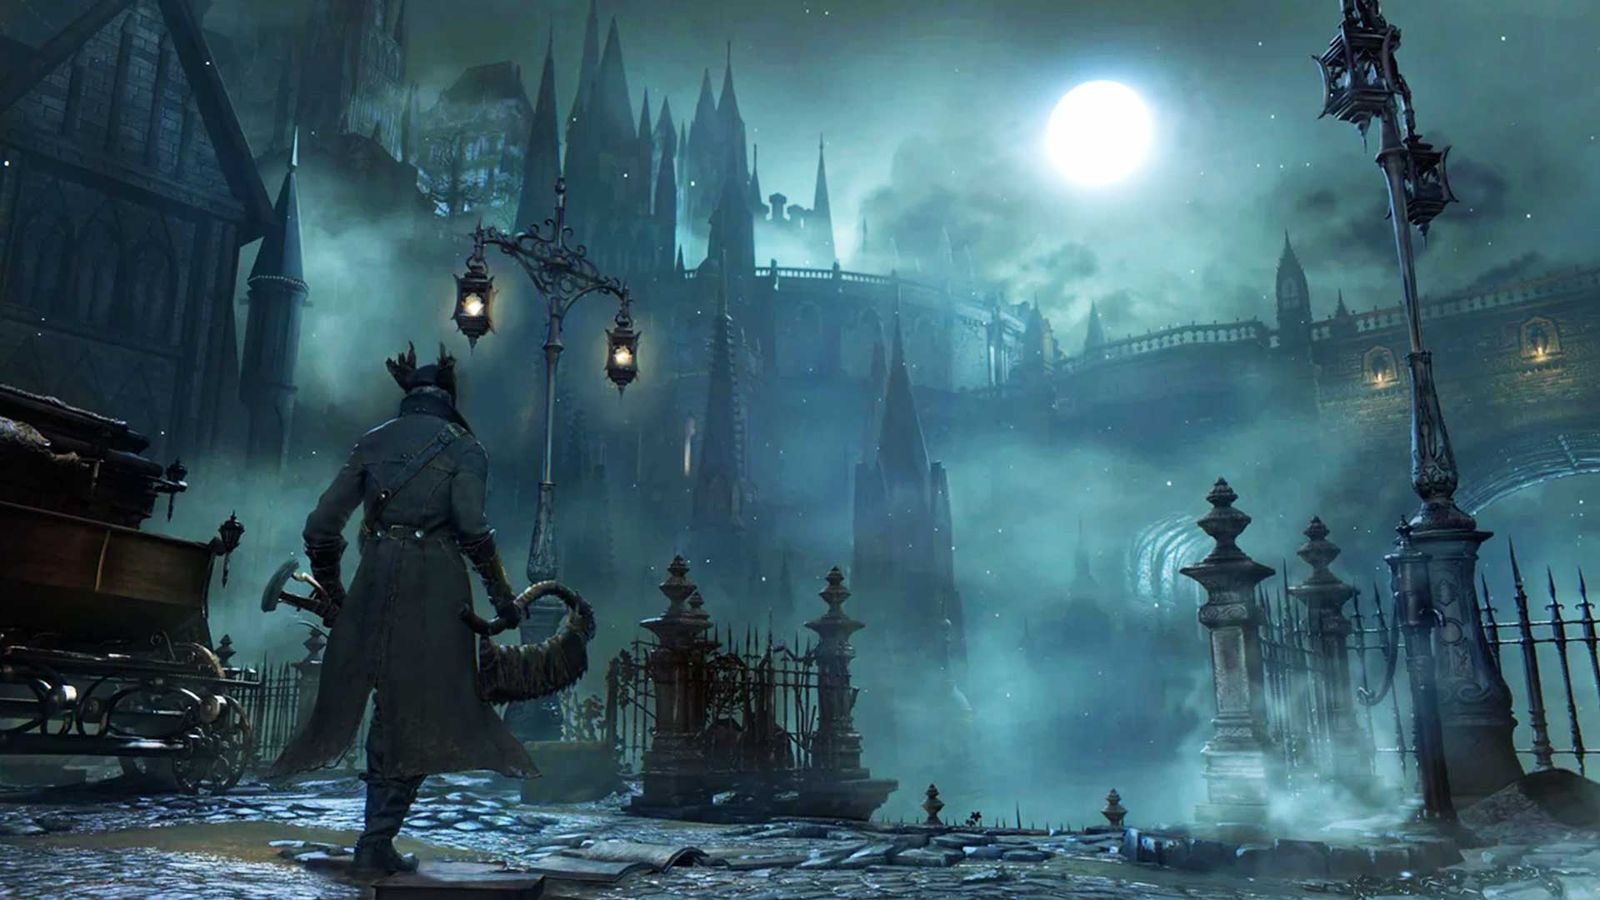 An image of Yharnam from Bloodborne, in at number 4 in the Top 10 worst video game cities to live in.